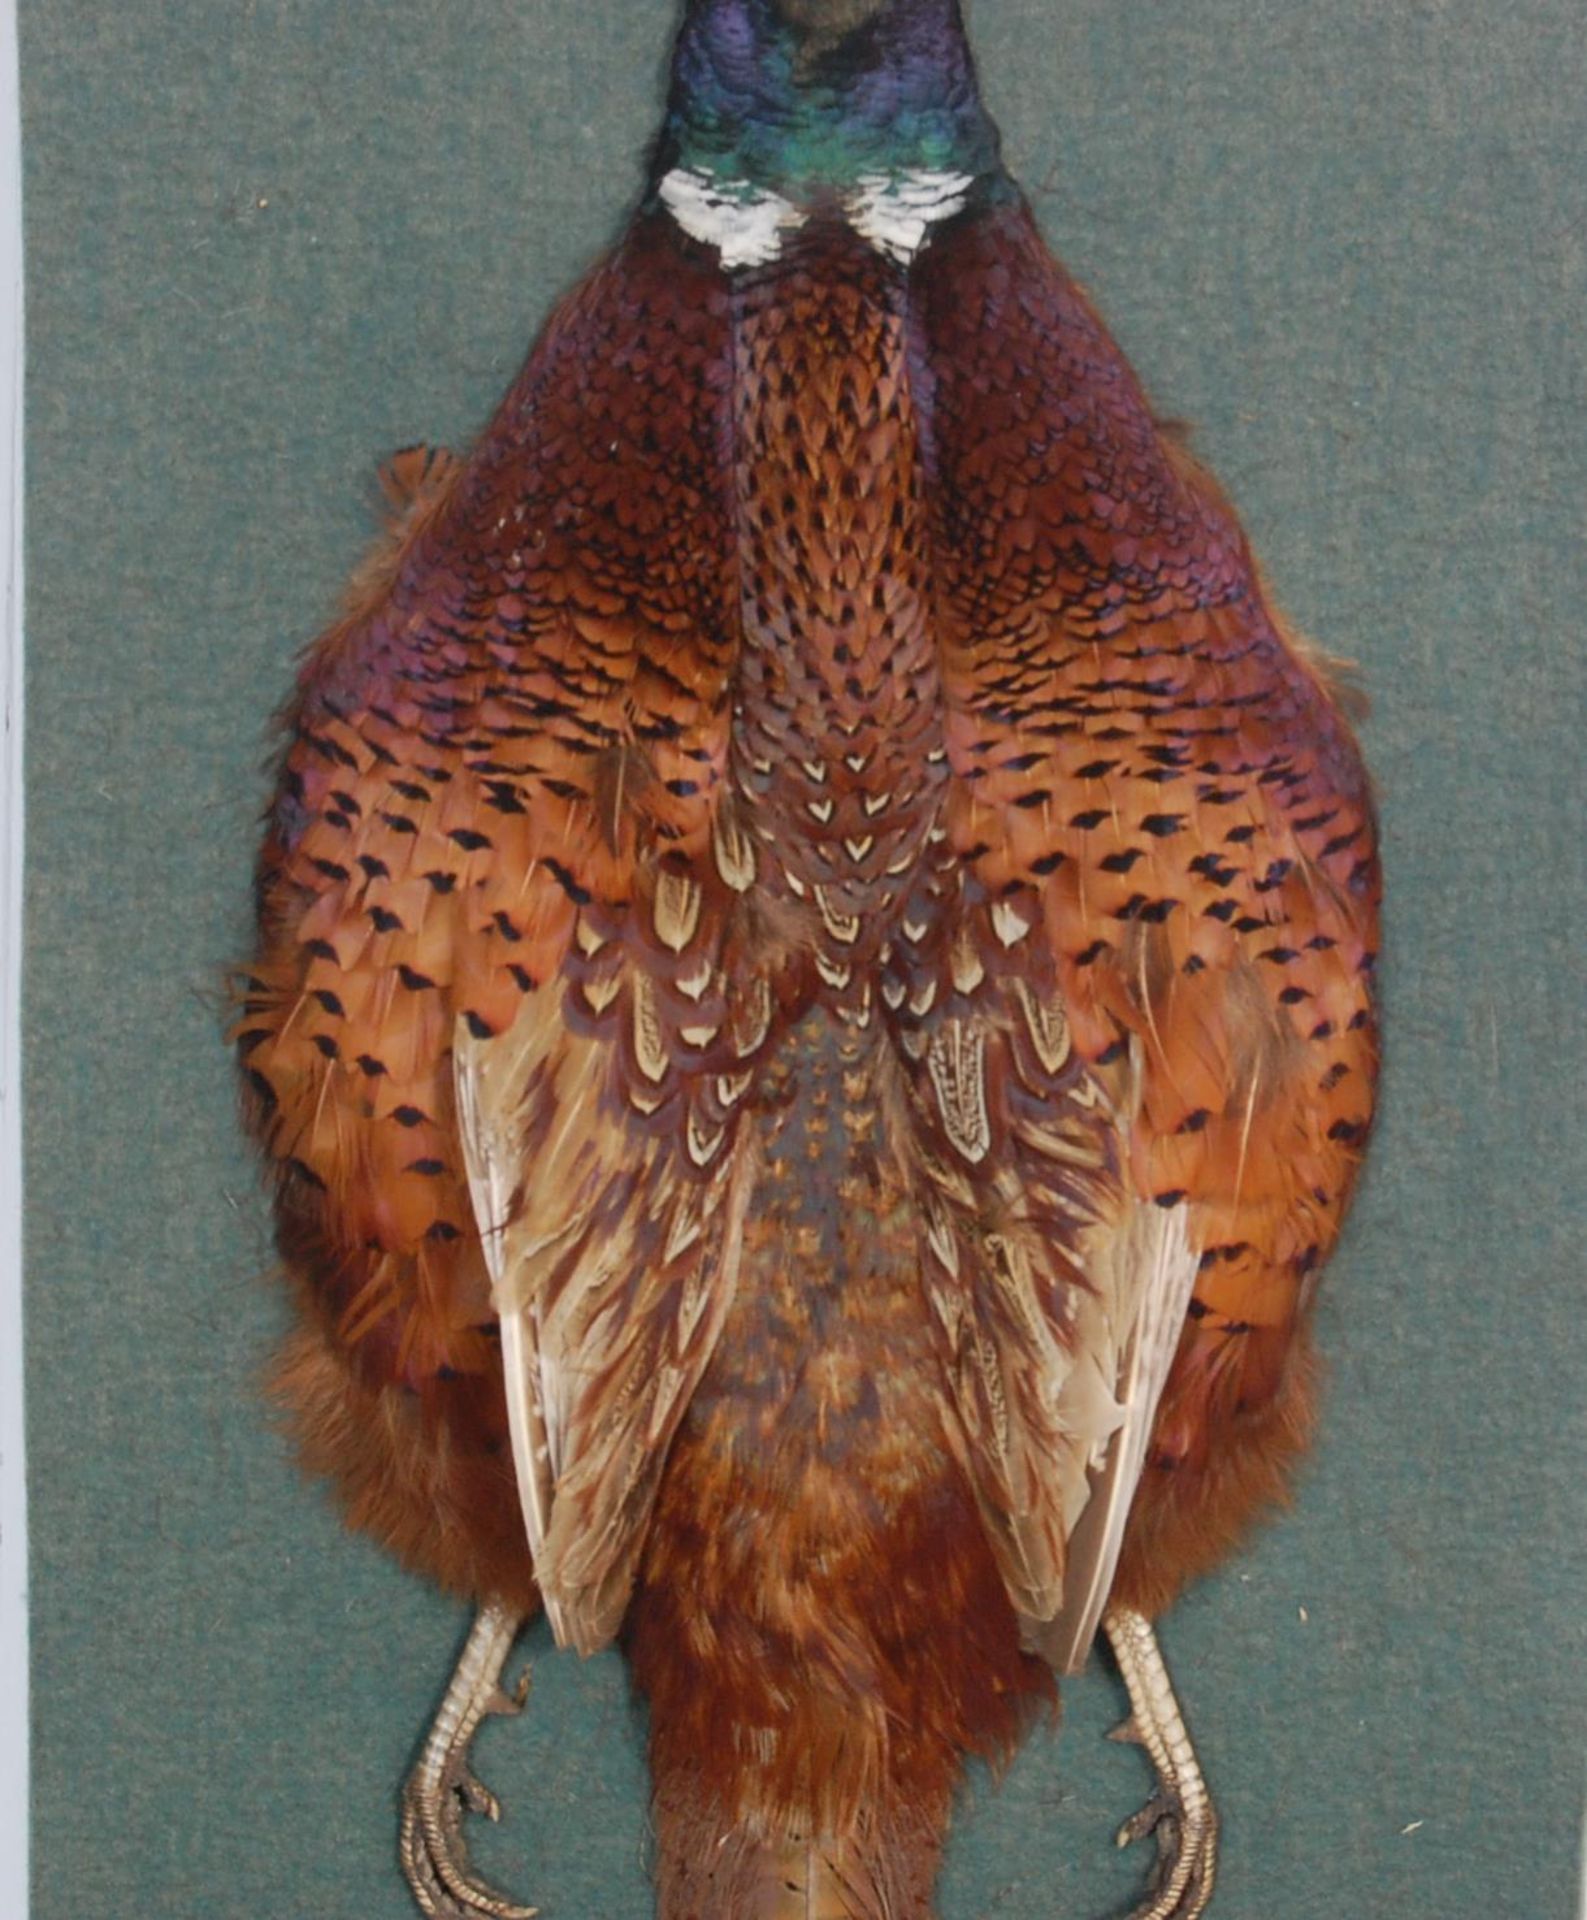 VINTAGE LATE 20TH CENTURY TAXIDERMY WALL HANGING OF A PHEASANT - Image 2 of 6